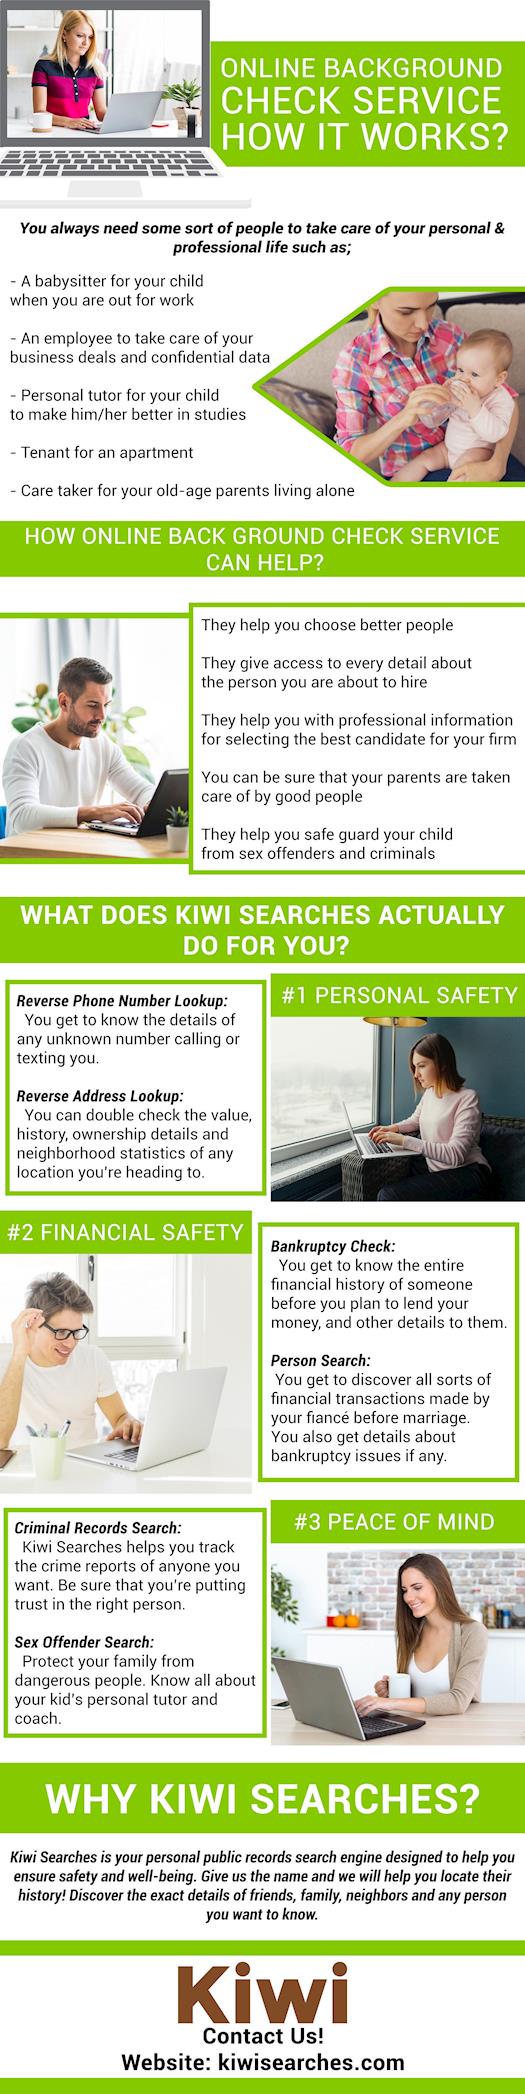 How Online Background Check Works - Kiwi Searches